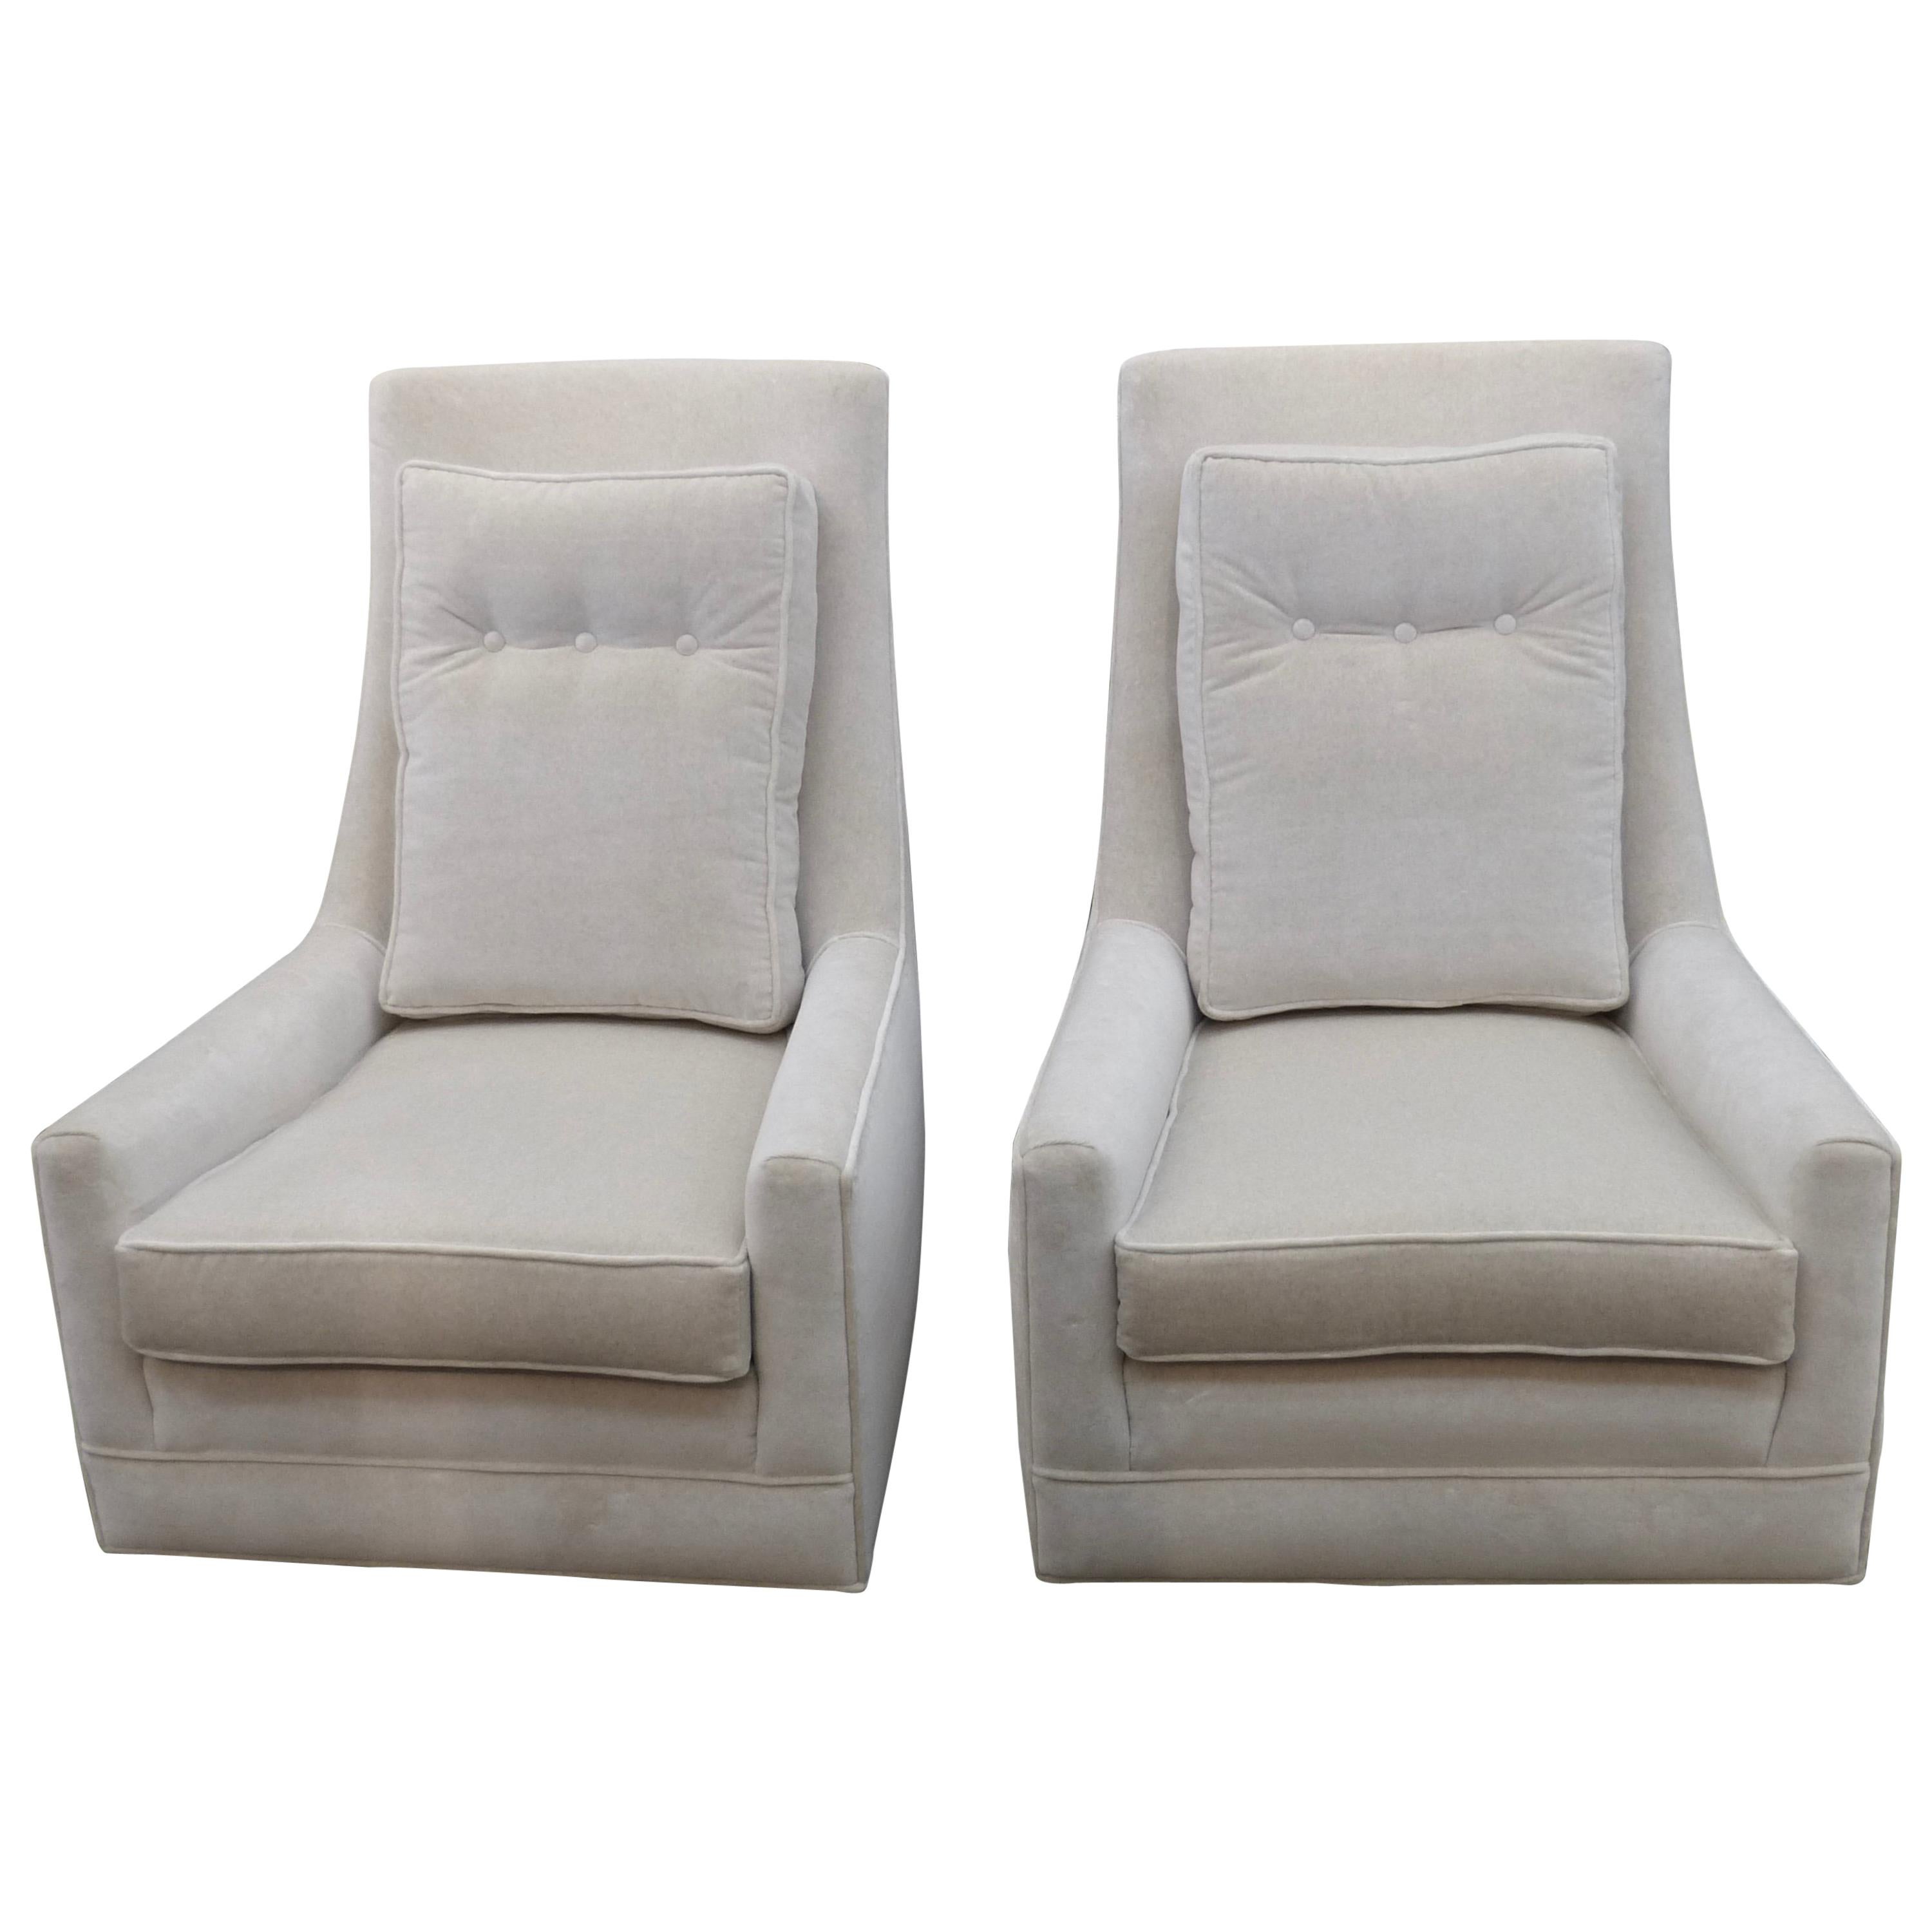 Pair of Vintage High Back Lounge Chairs 